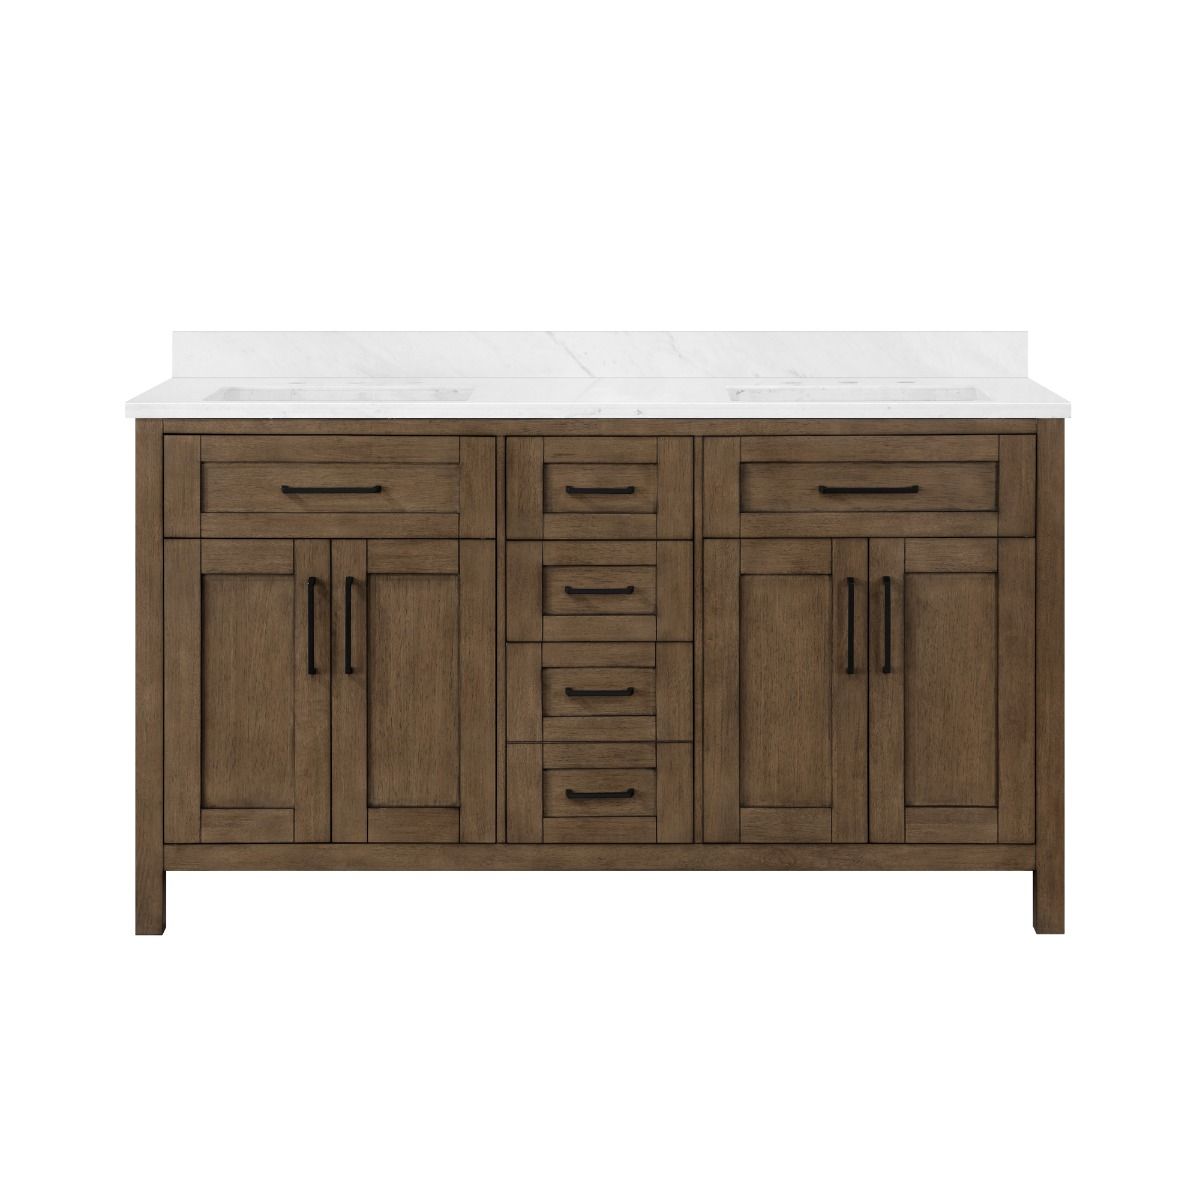 OVE DECORS 15VVA-TAH660-059FY TAHOE VI 60 INCH DOUBLE SINK BATHROOM VANITY MARBLE COUNTERTOP IN ALMOND LATTE AND BLACK HARDWARE WITH POWER BAR